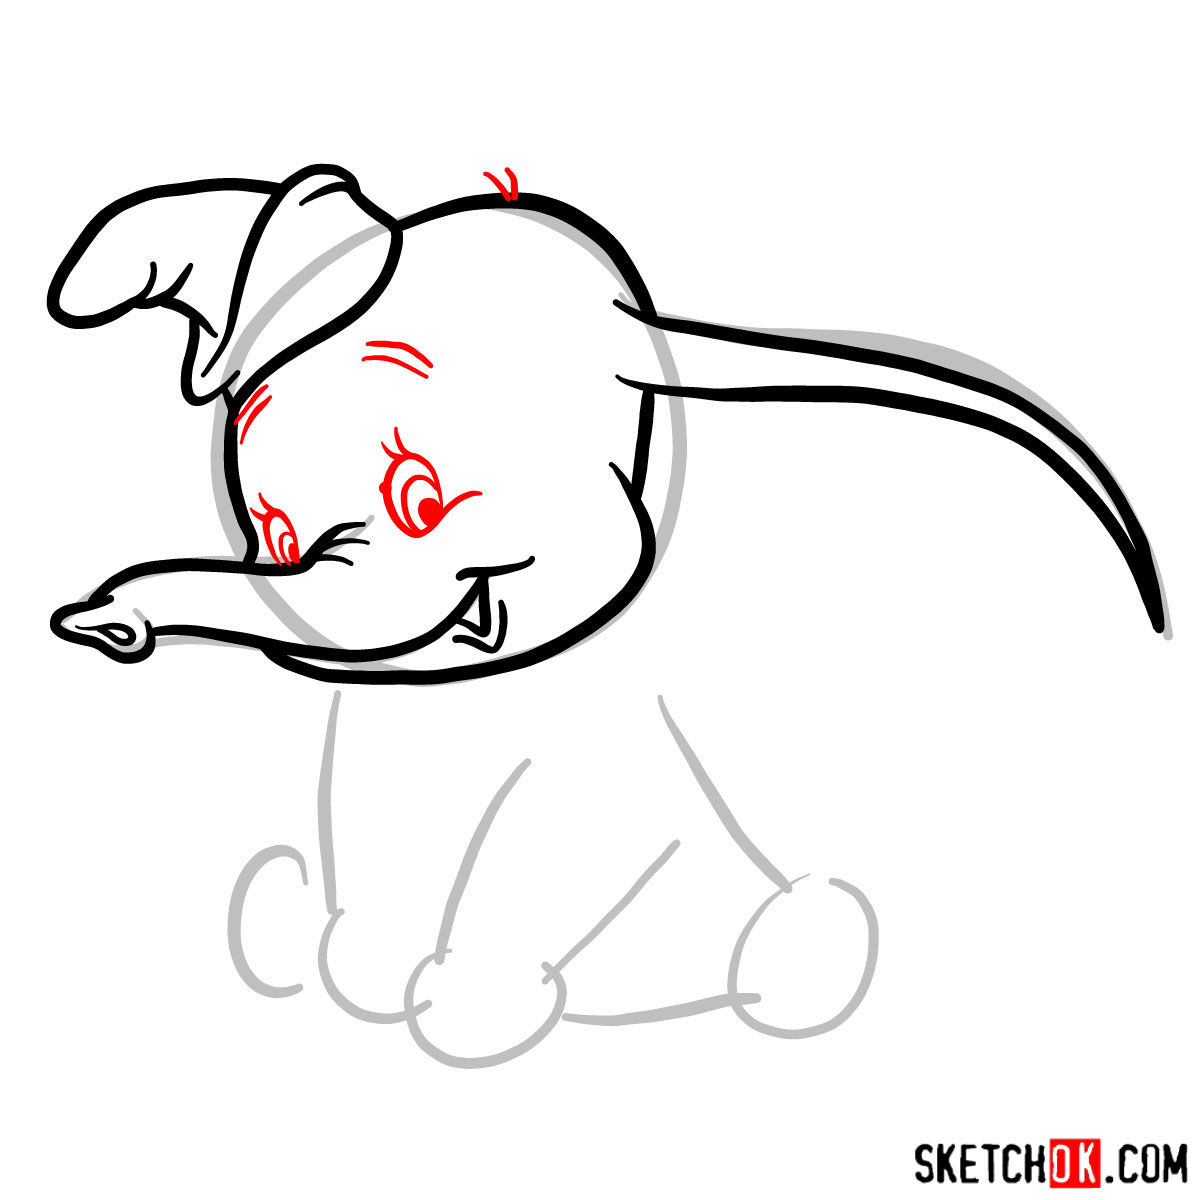 How to draw Dumbo the elephant - step 04